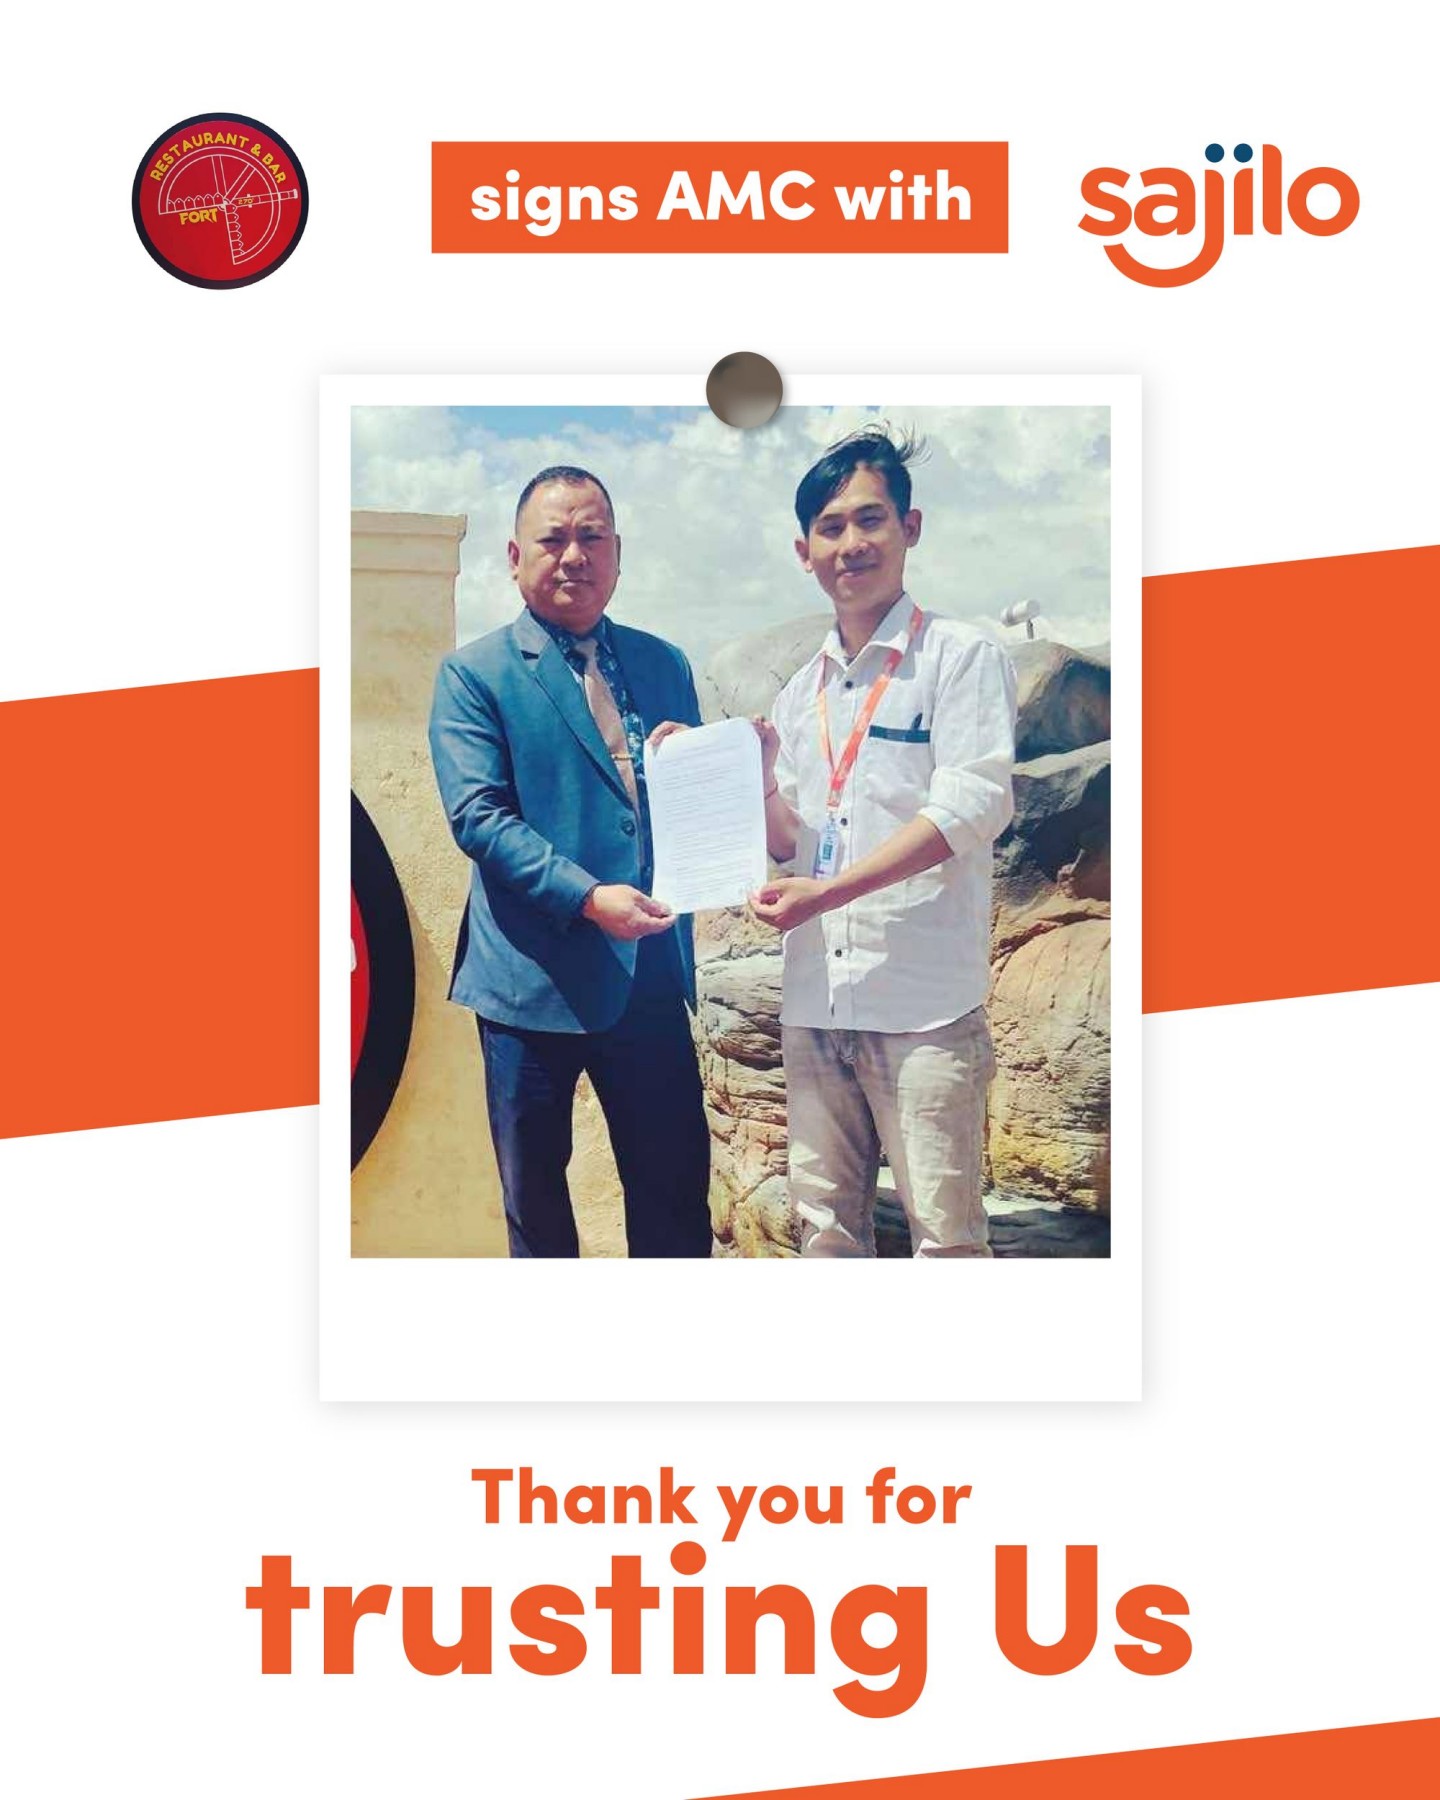 AMC signed with FORT 270 RESTRO AND BAR